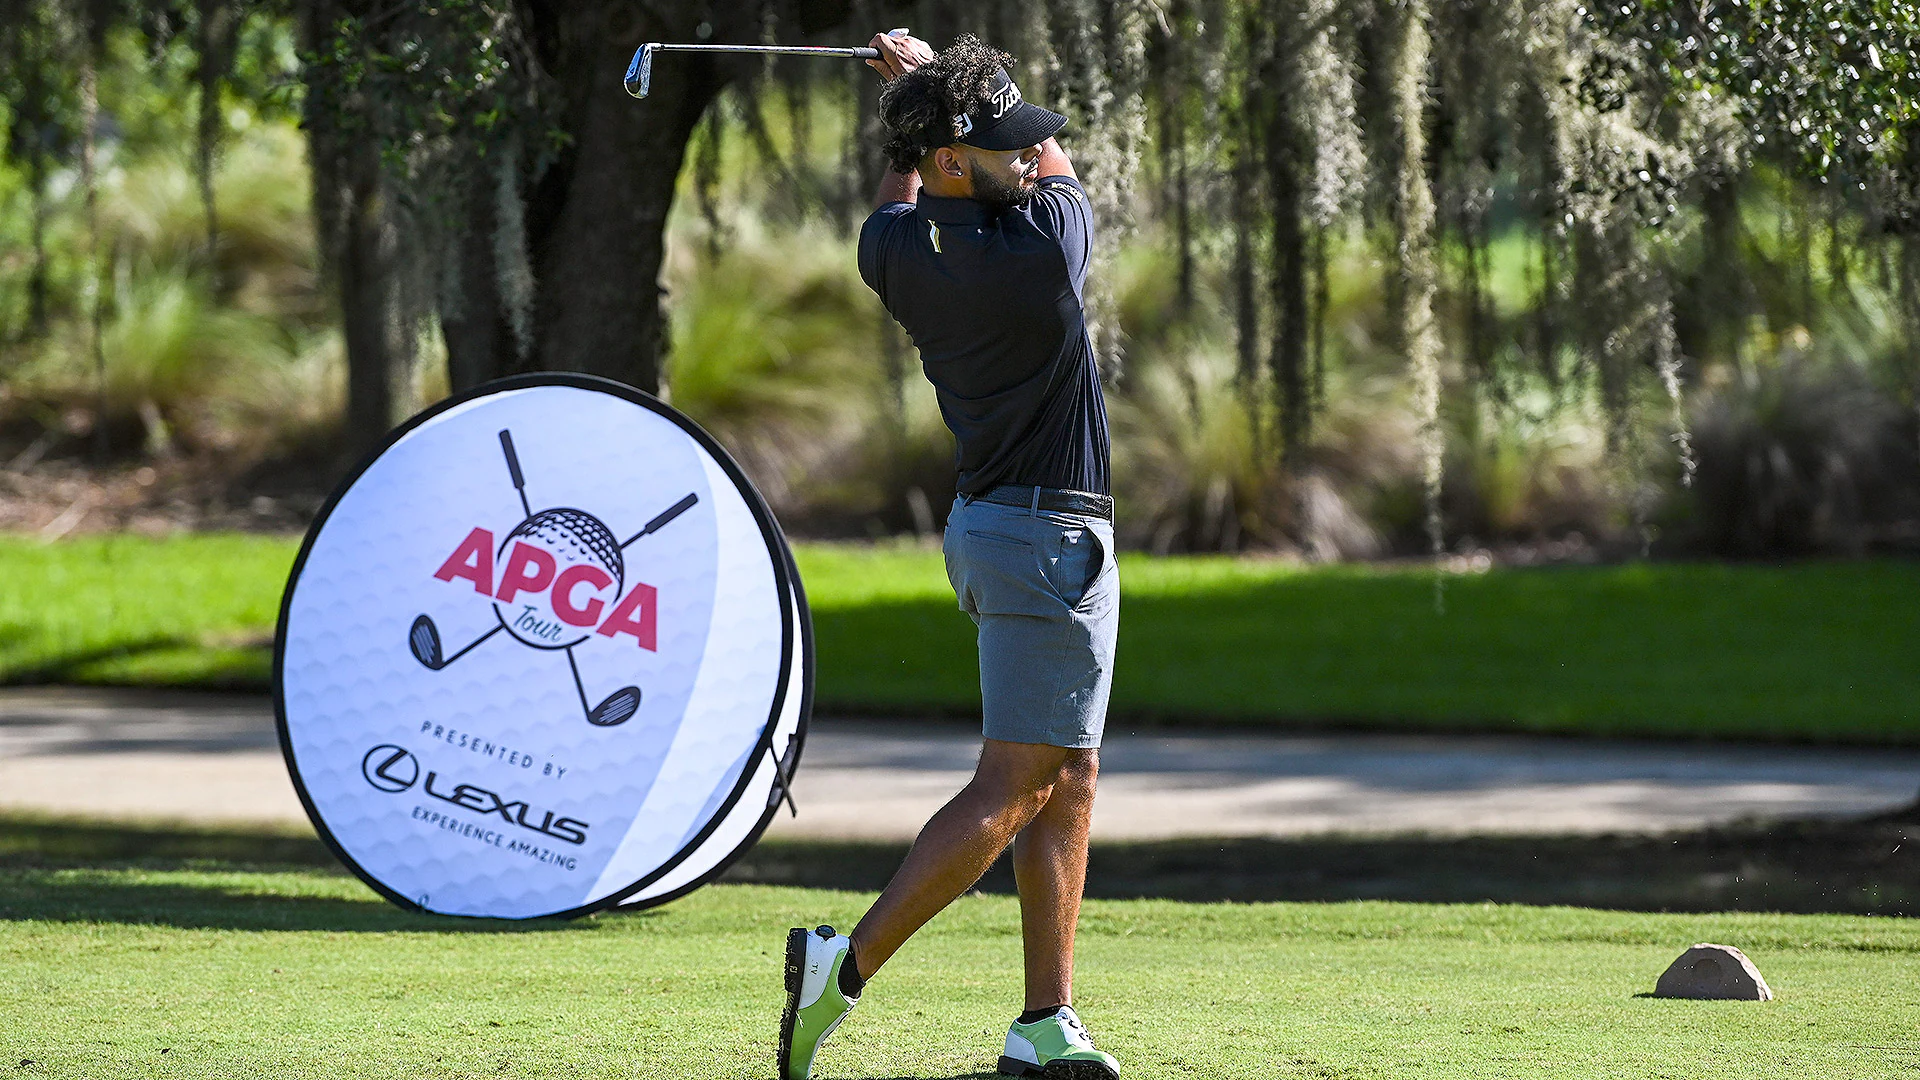 APGA Tour competing at Torrey Pines, with final round Sunday on Golf Channel